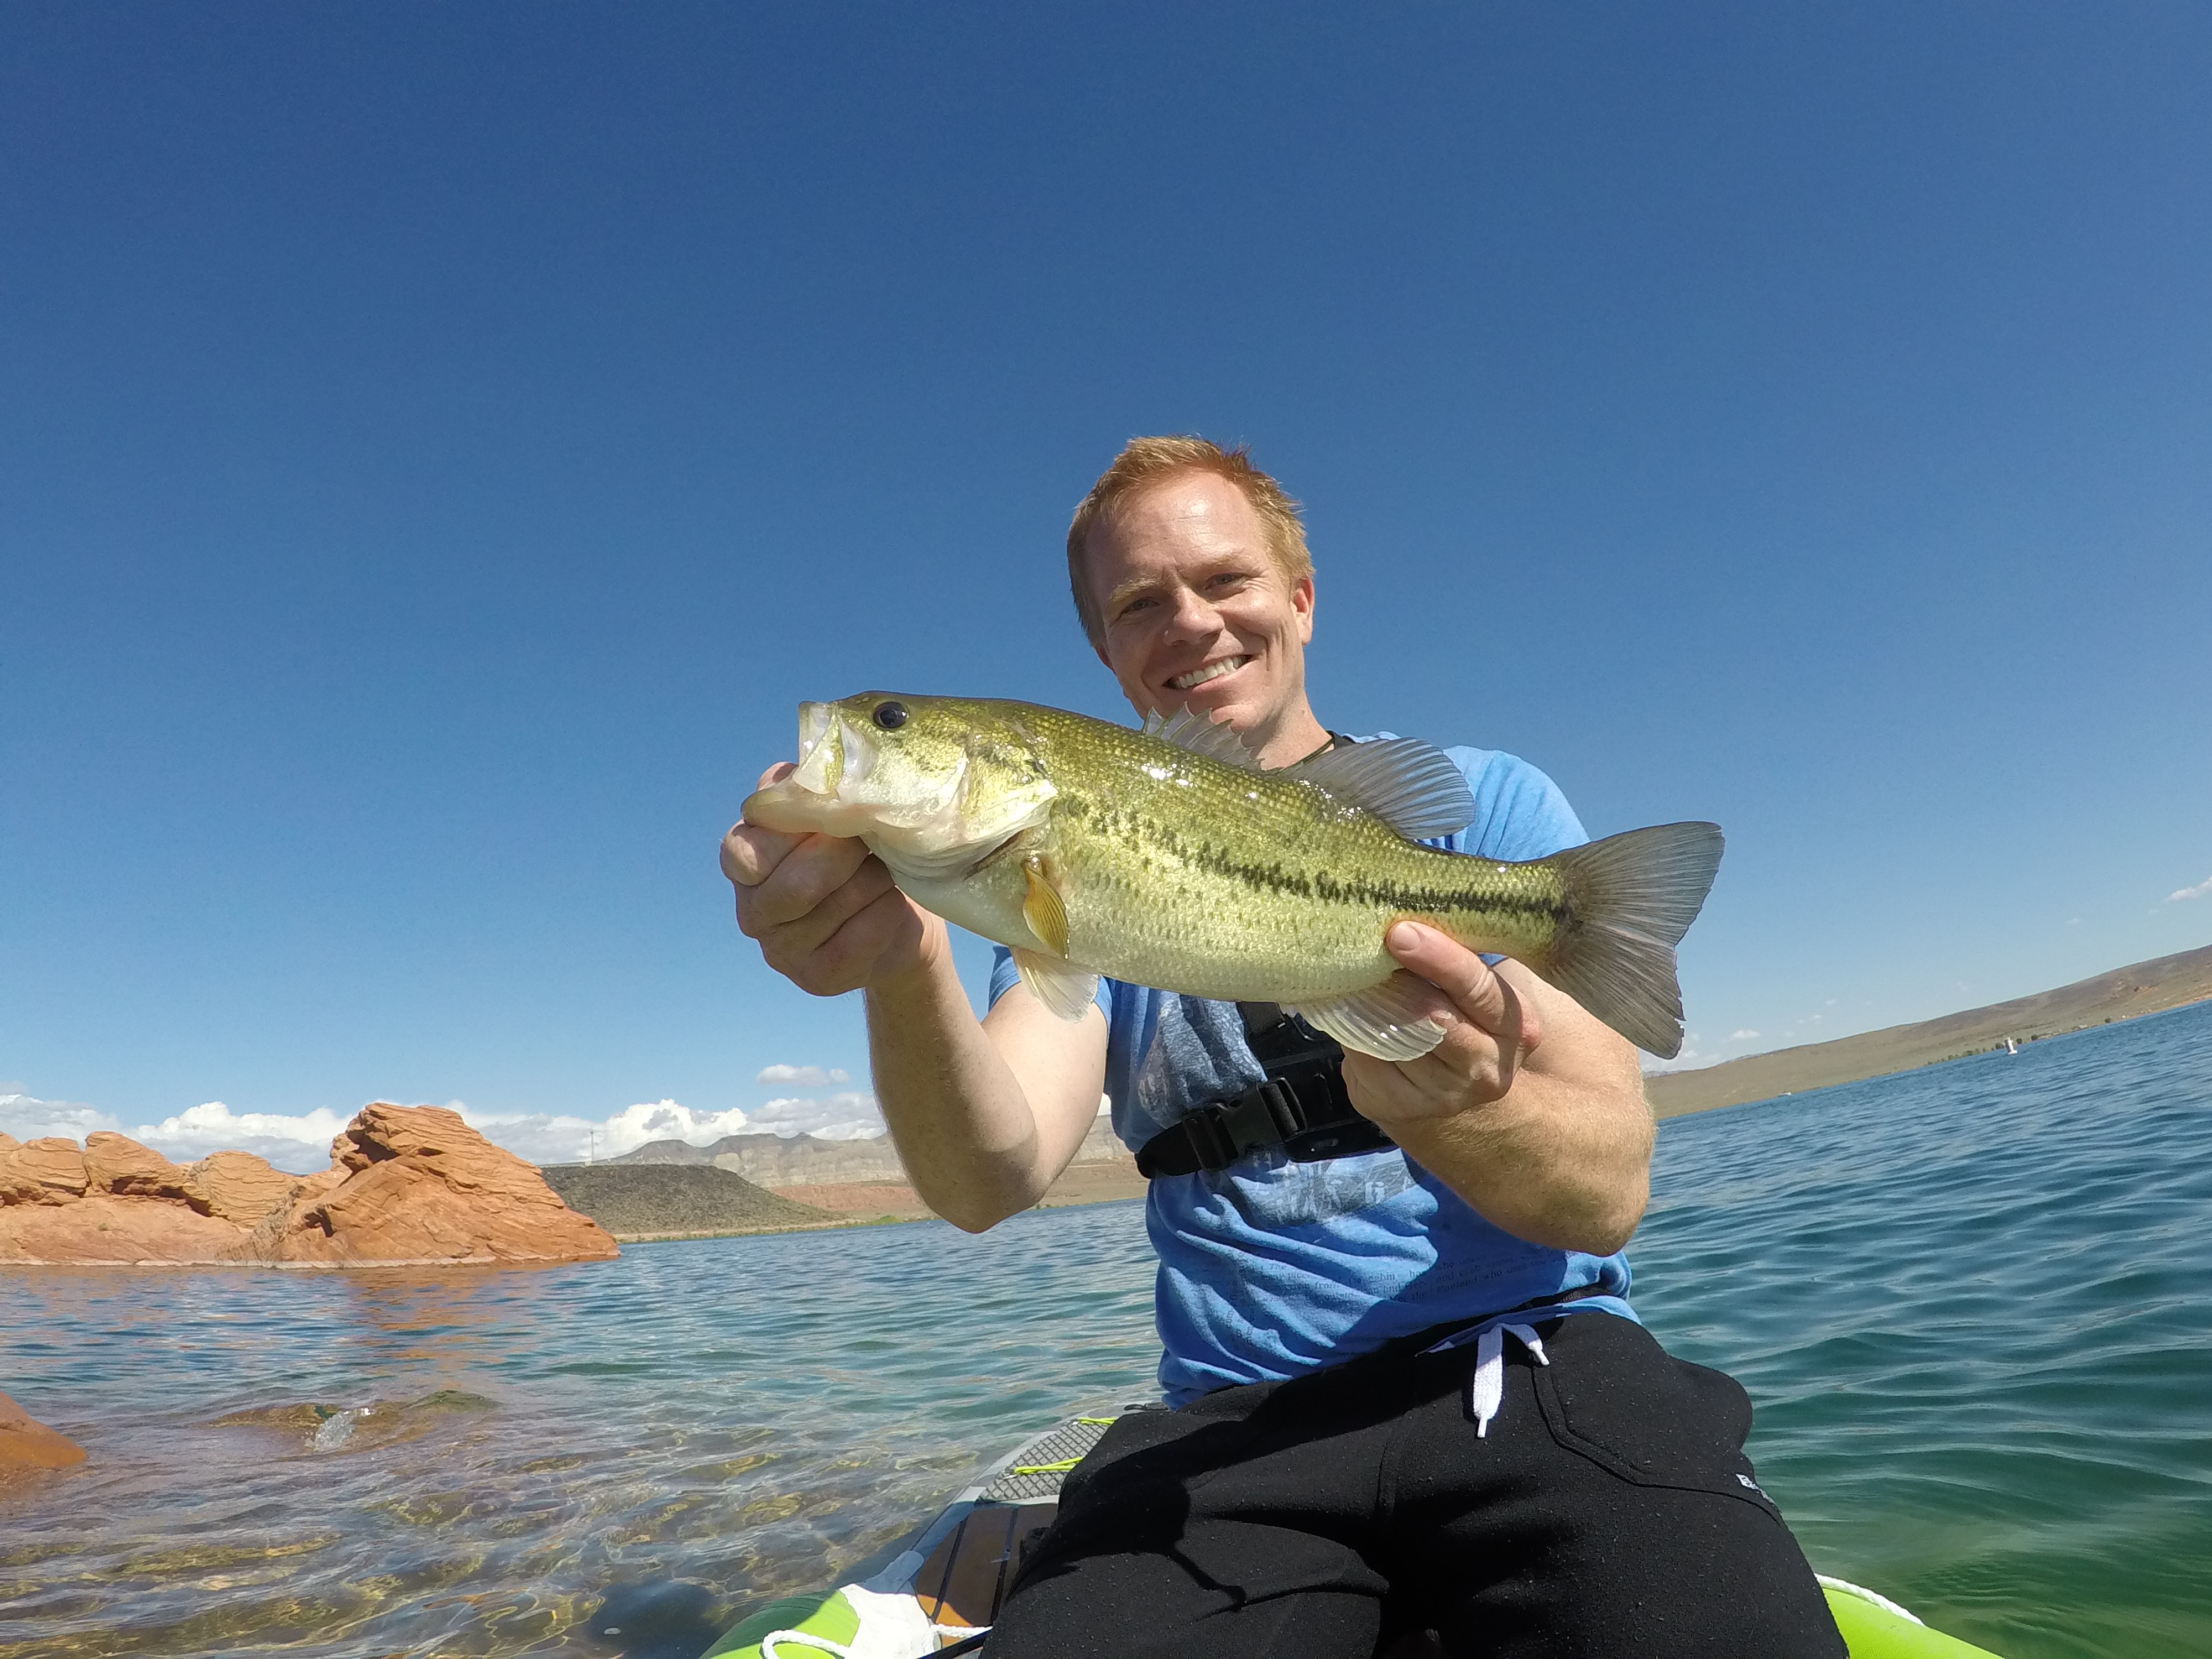 Catch Bass on Highly Fished Water - Fishing Report Sand Hollow - Kraken Bass